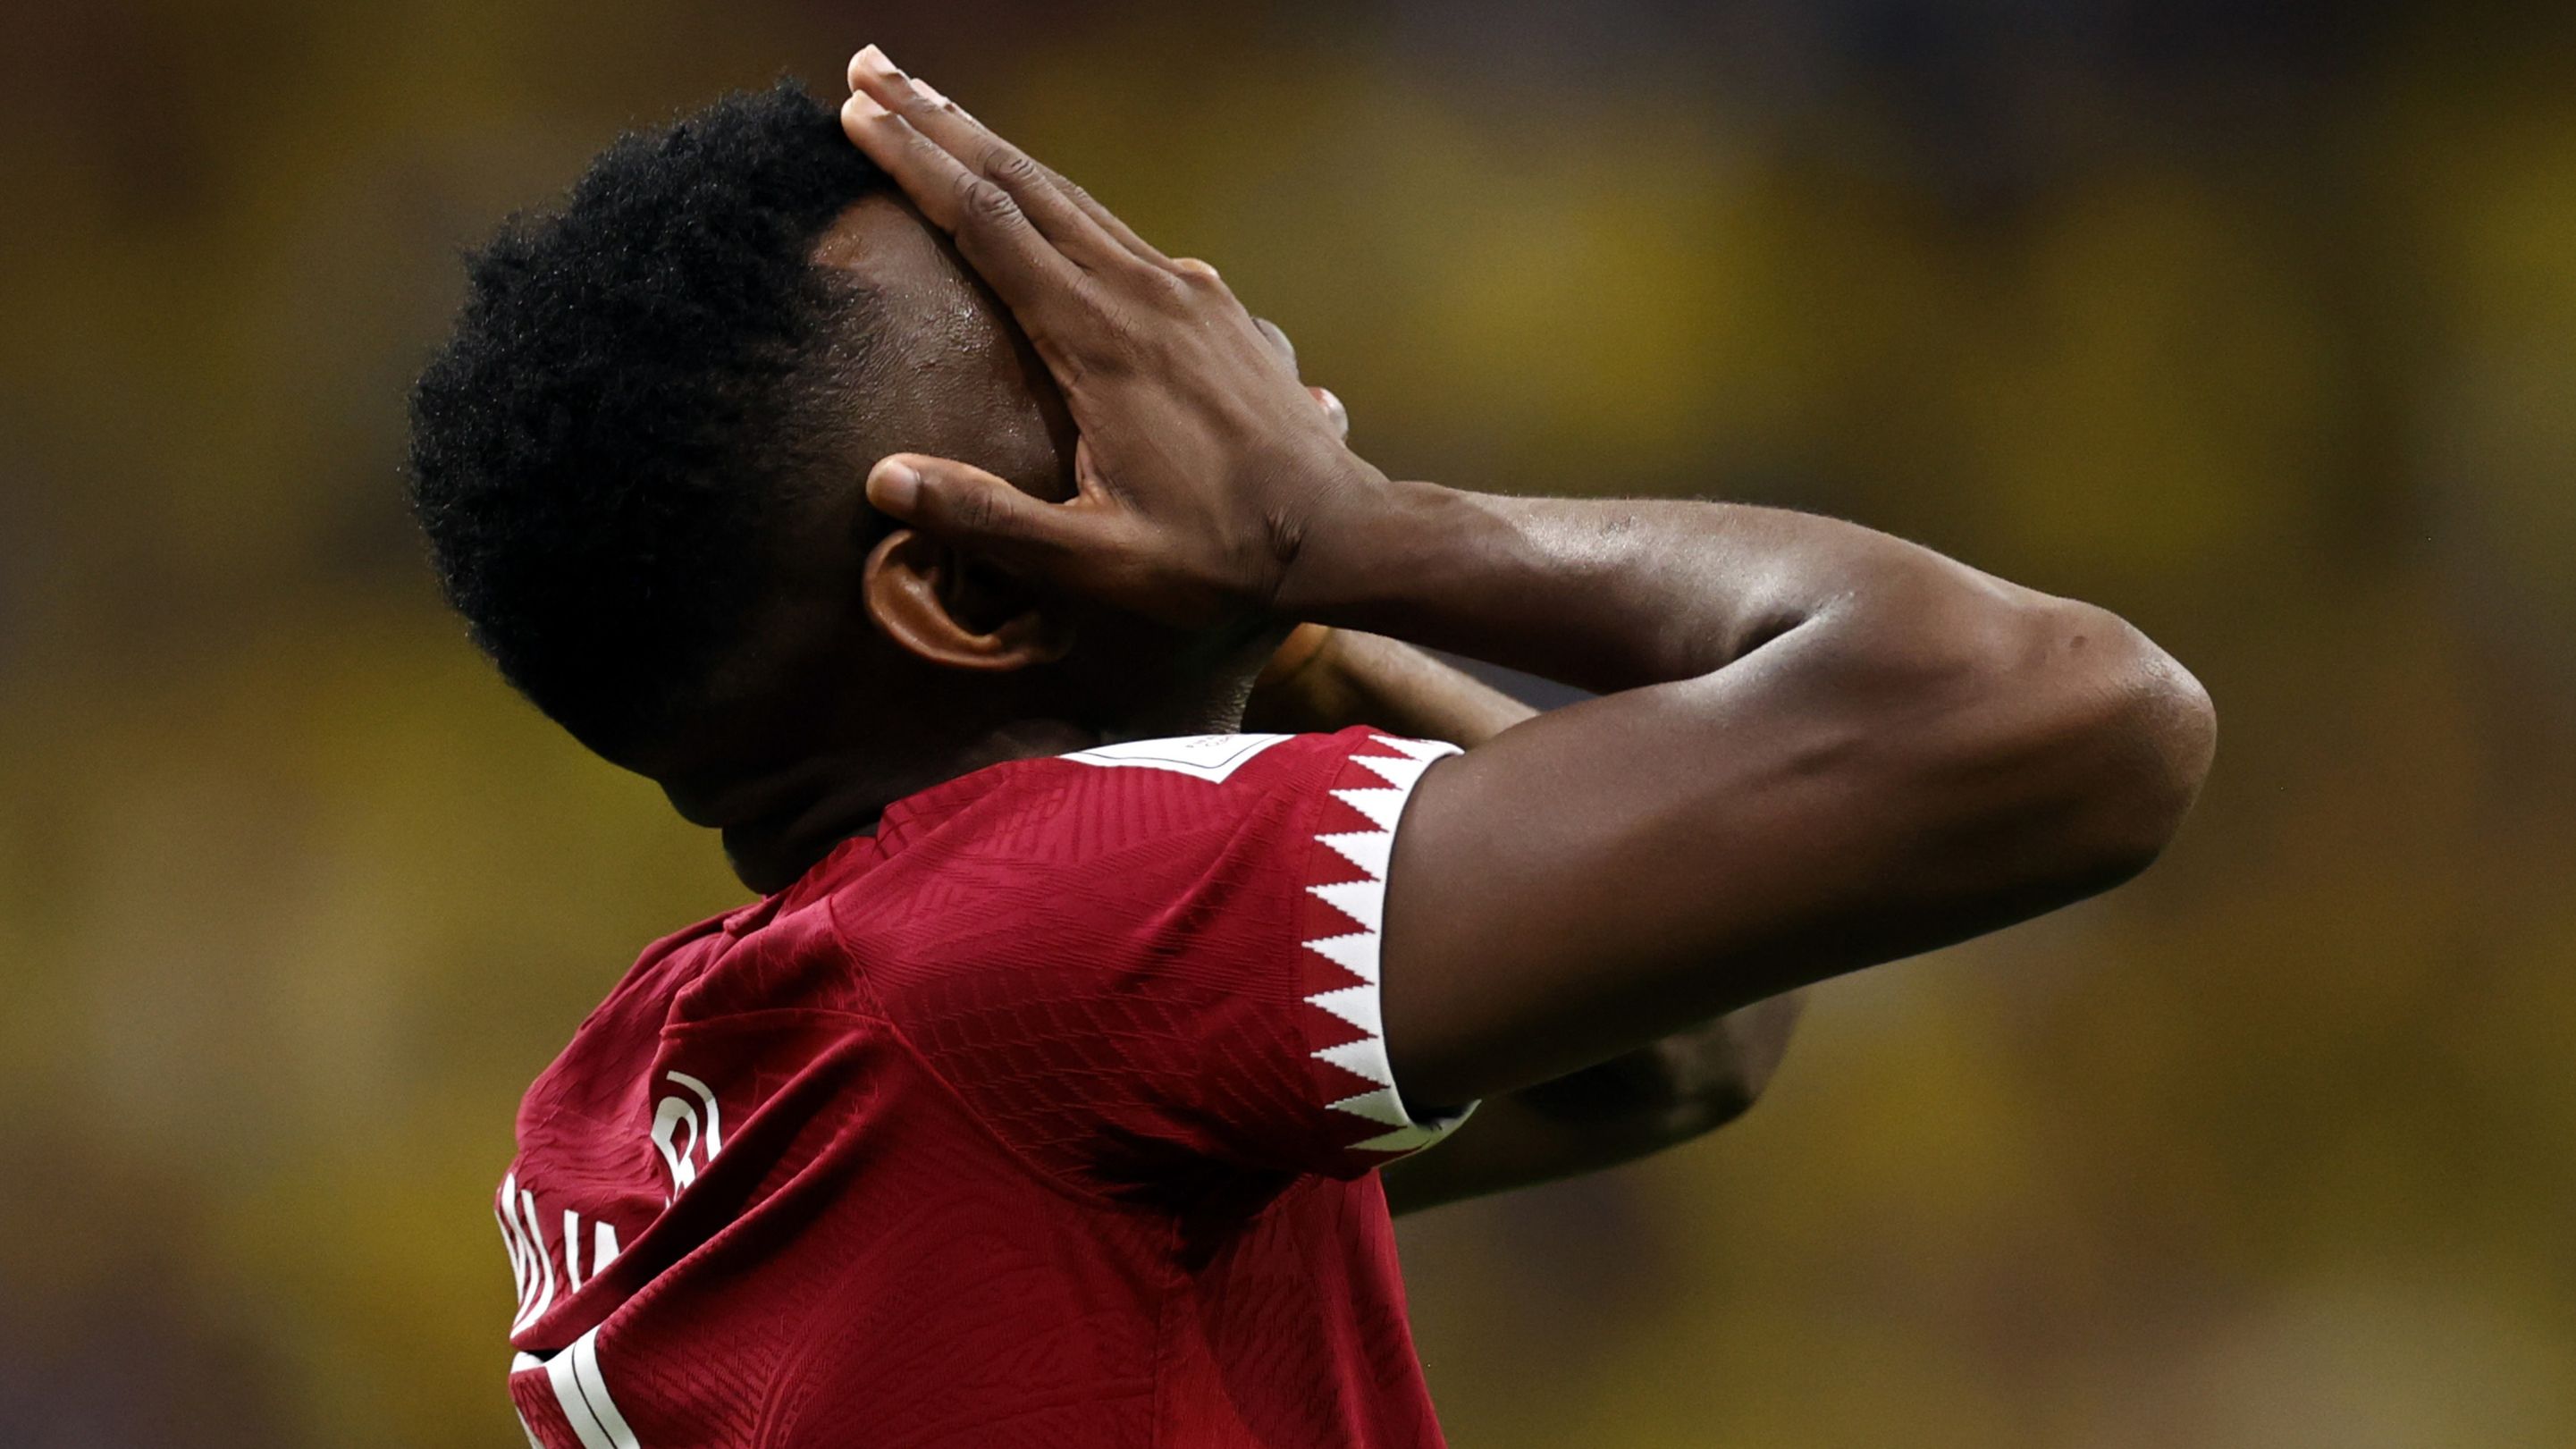 Qatar becomes first host nation to lose tournament opener in 92-year FIFA World Cup history